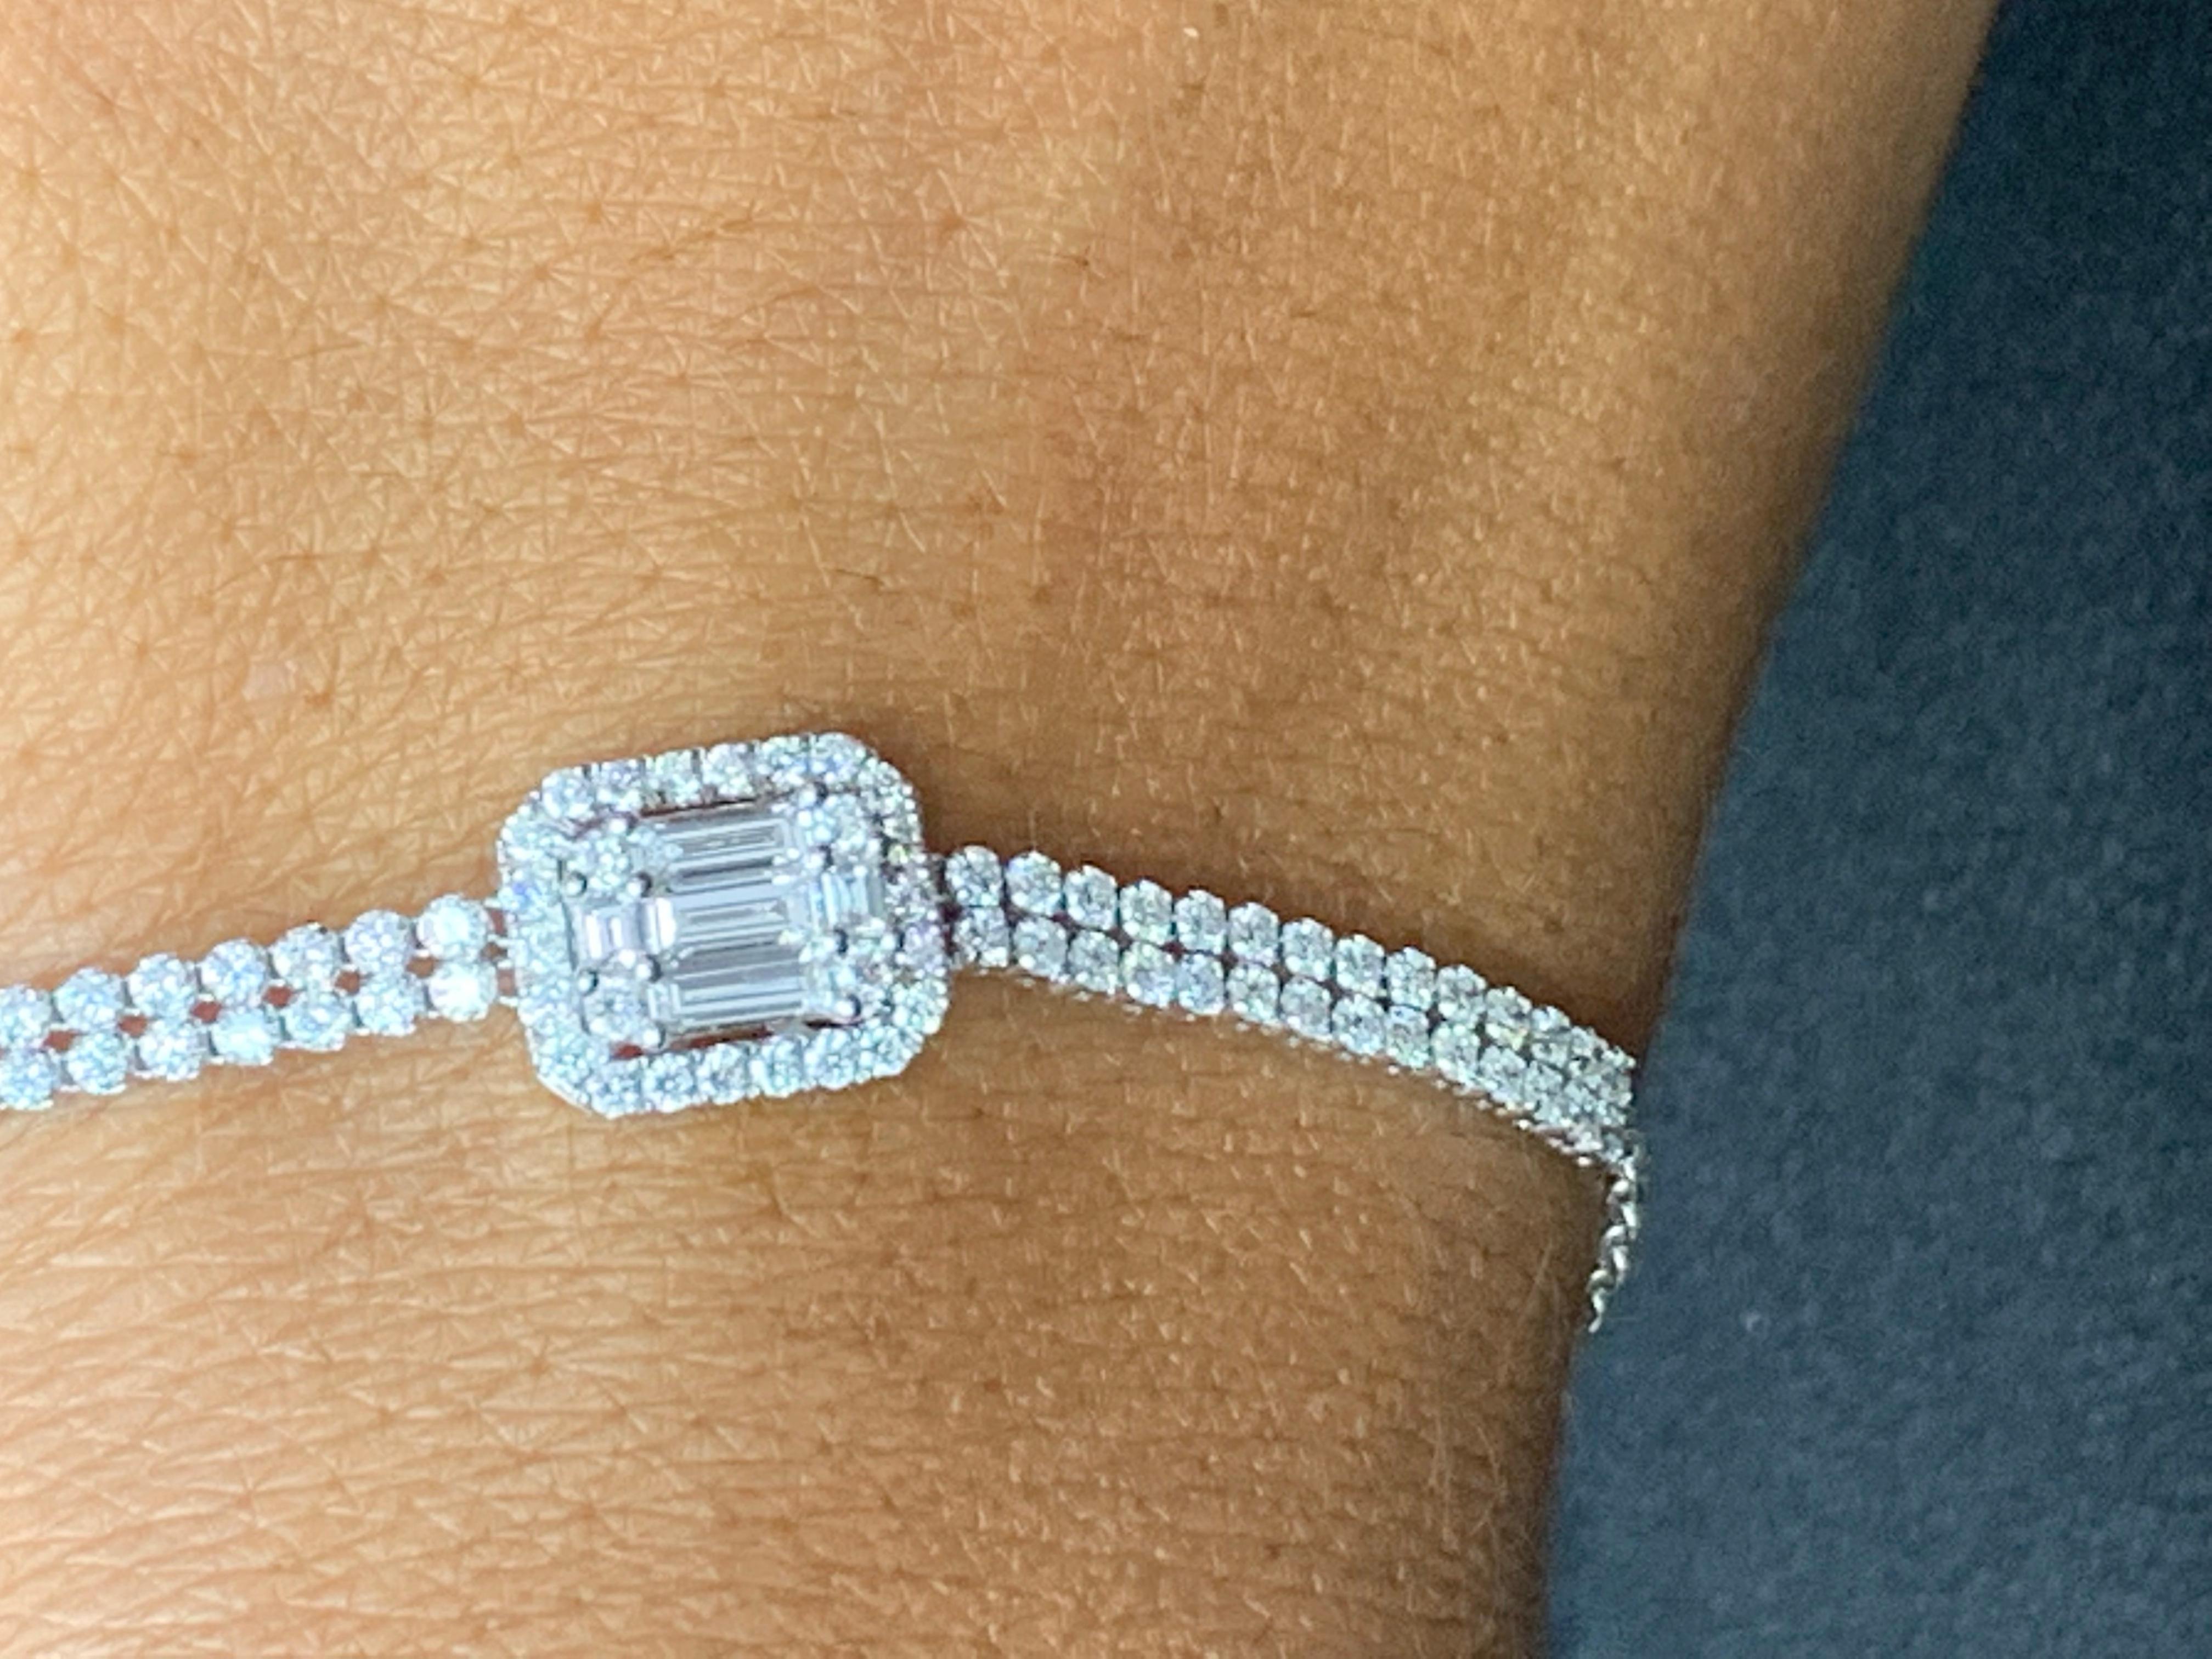 Are you looking to make an adjustment to your style? Well then slide this elegant adjustable bracelet around your wrist is just what you need! This 14k white gold bracelet forms a classic design adorned with a center cluster of baguette and round